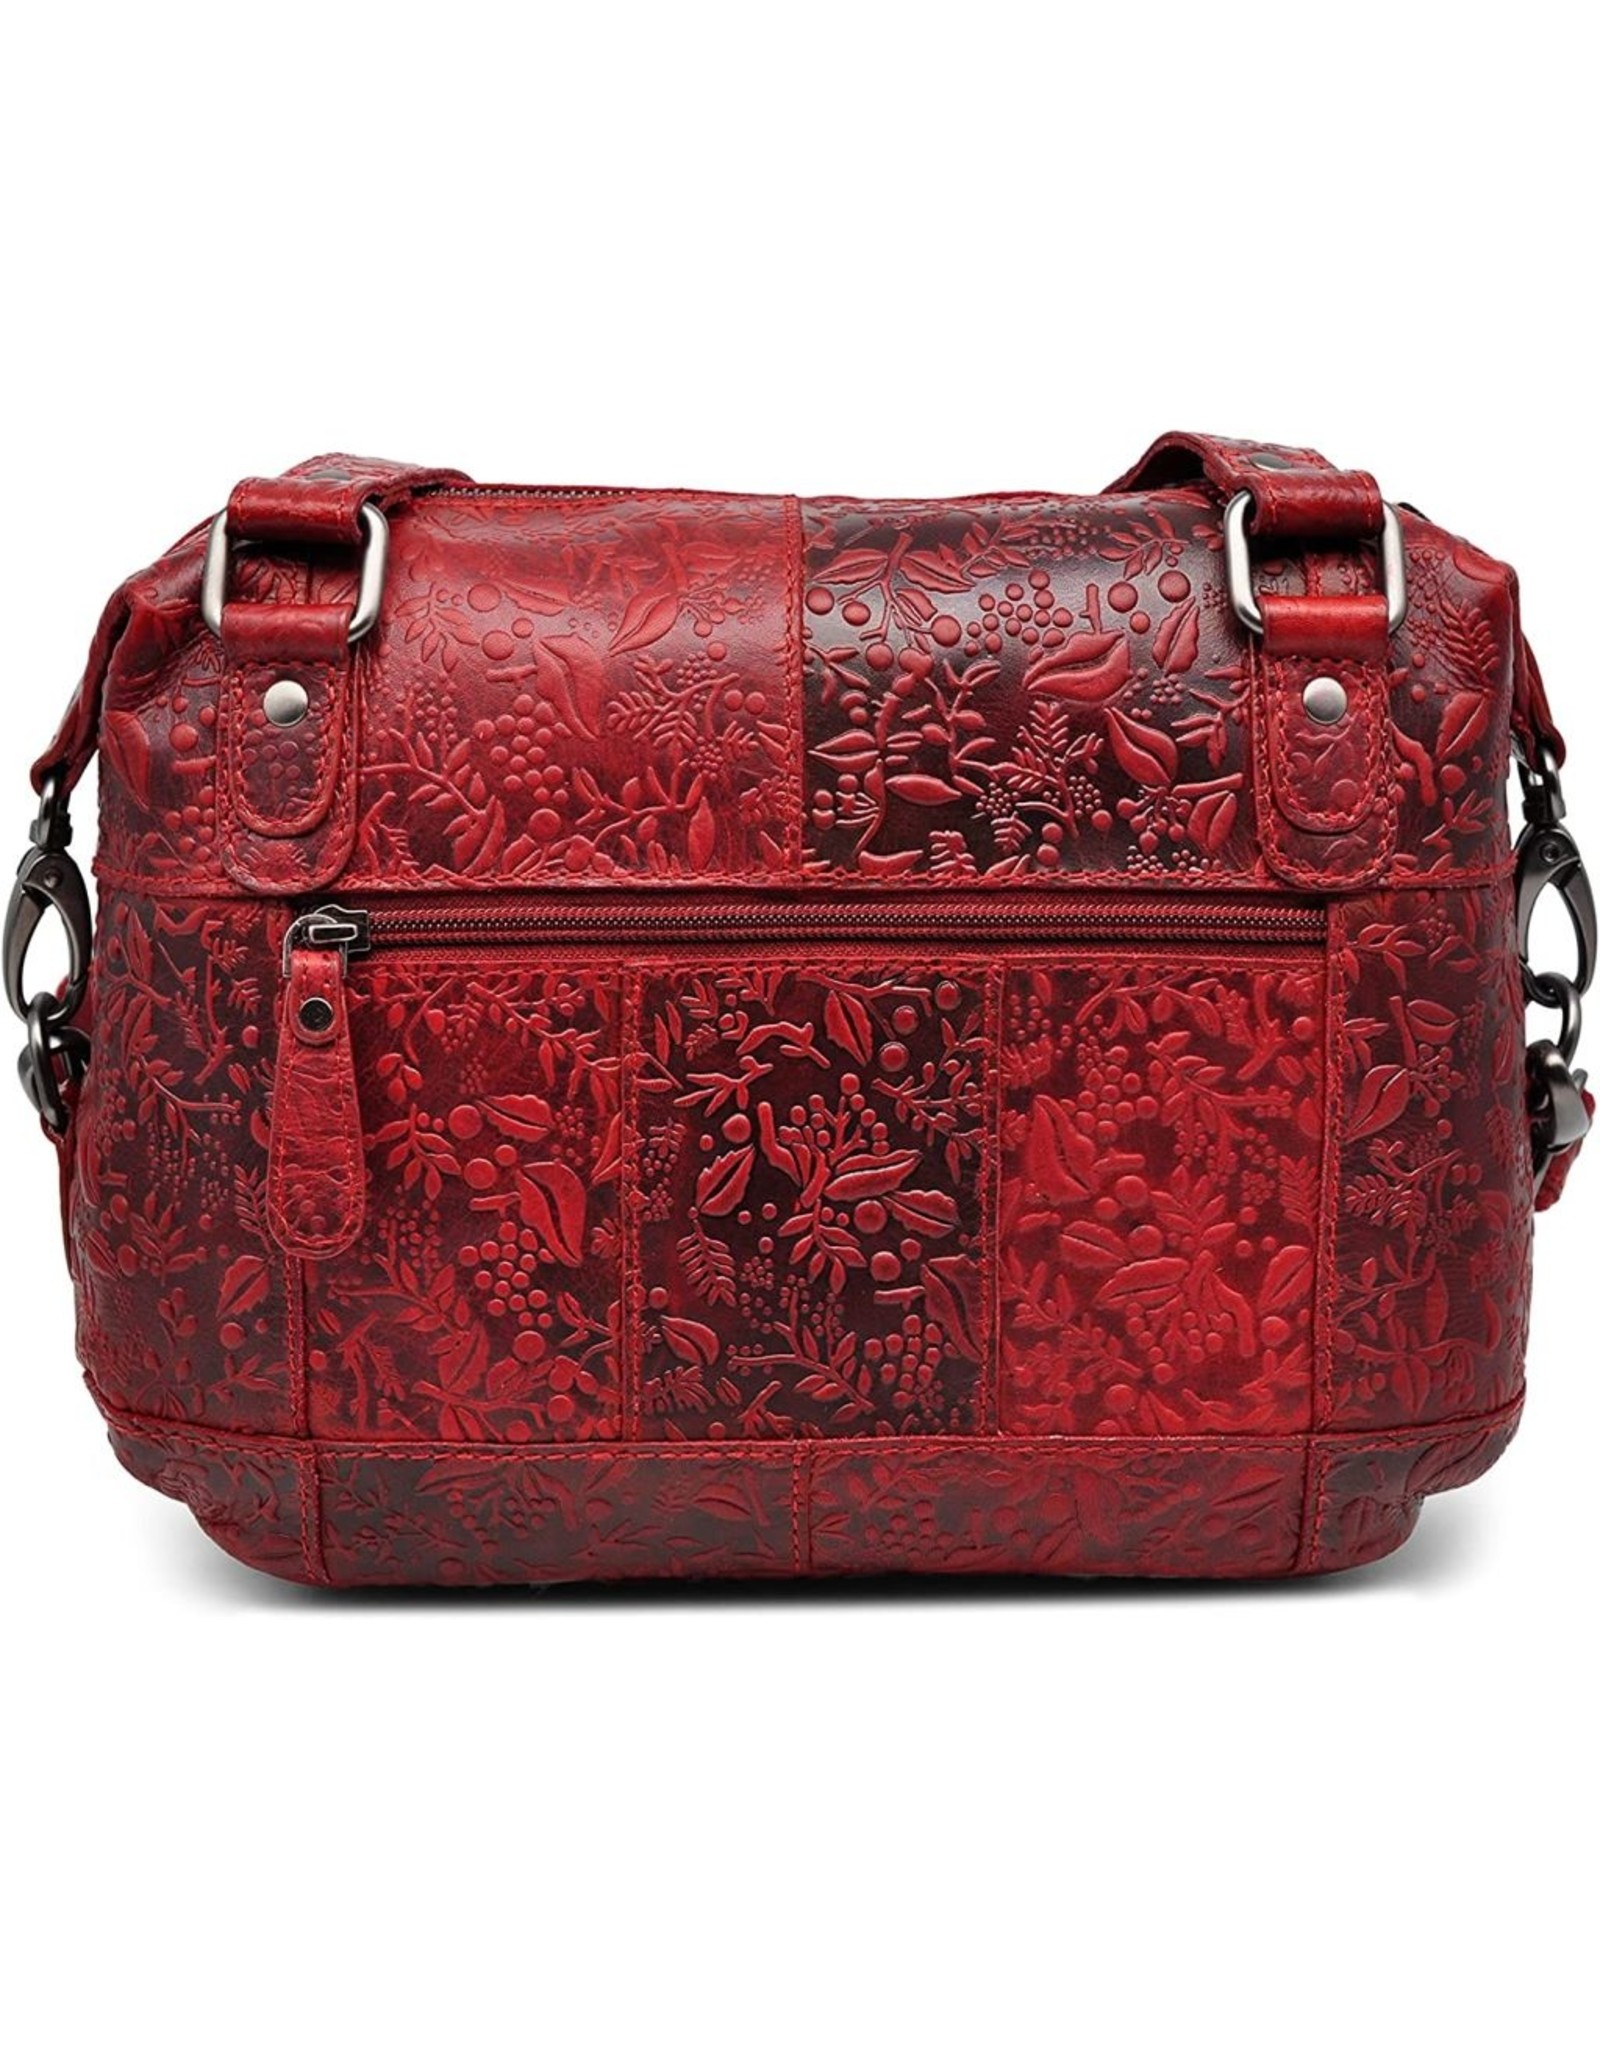 HillBurry Leather Shoulder bags  leather crossbody bags - HillBurry Shoulder Bag with Embossed Floral Print Red